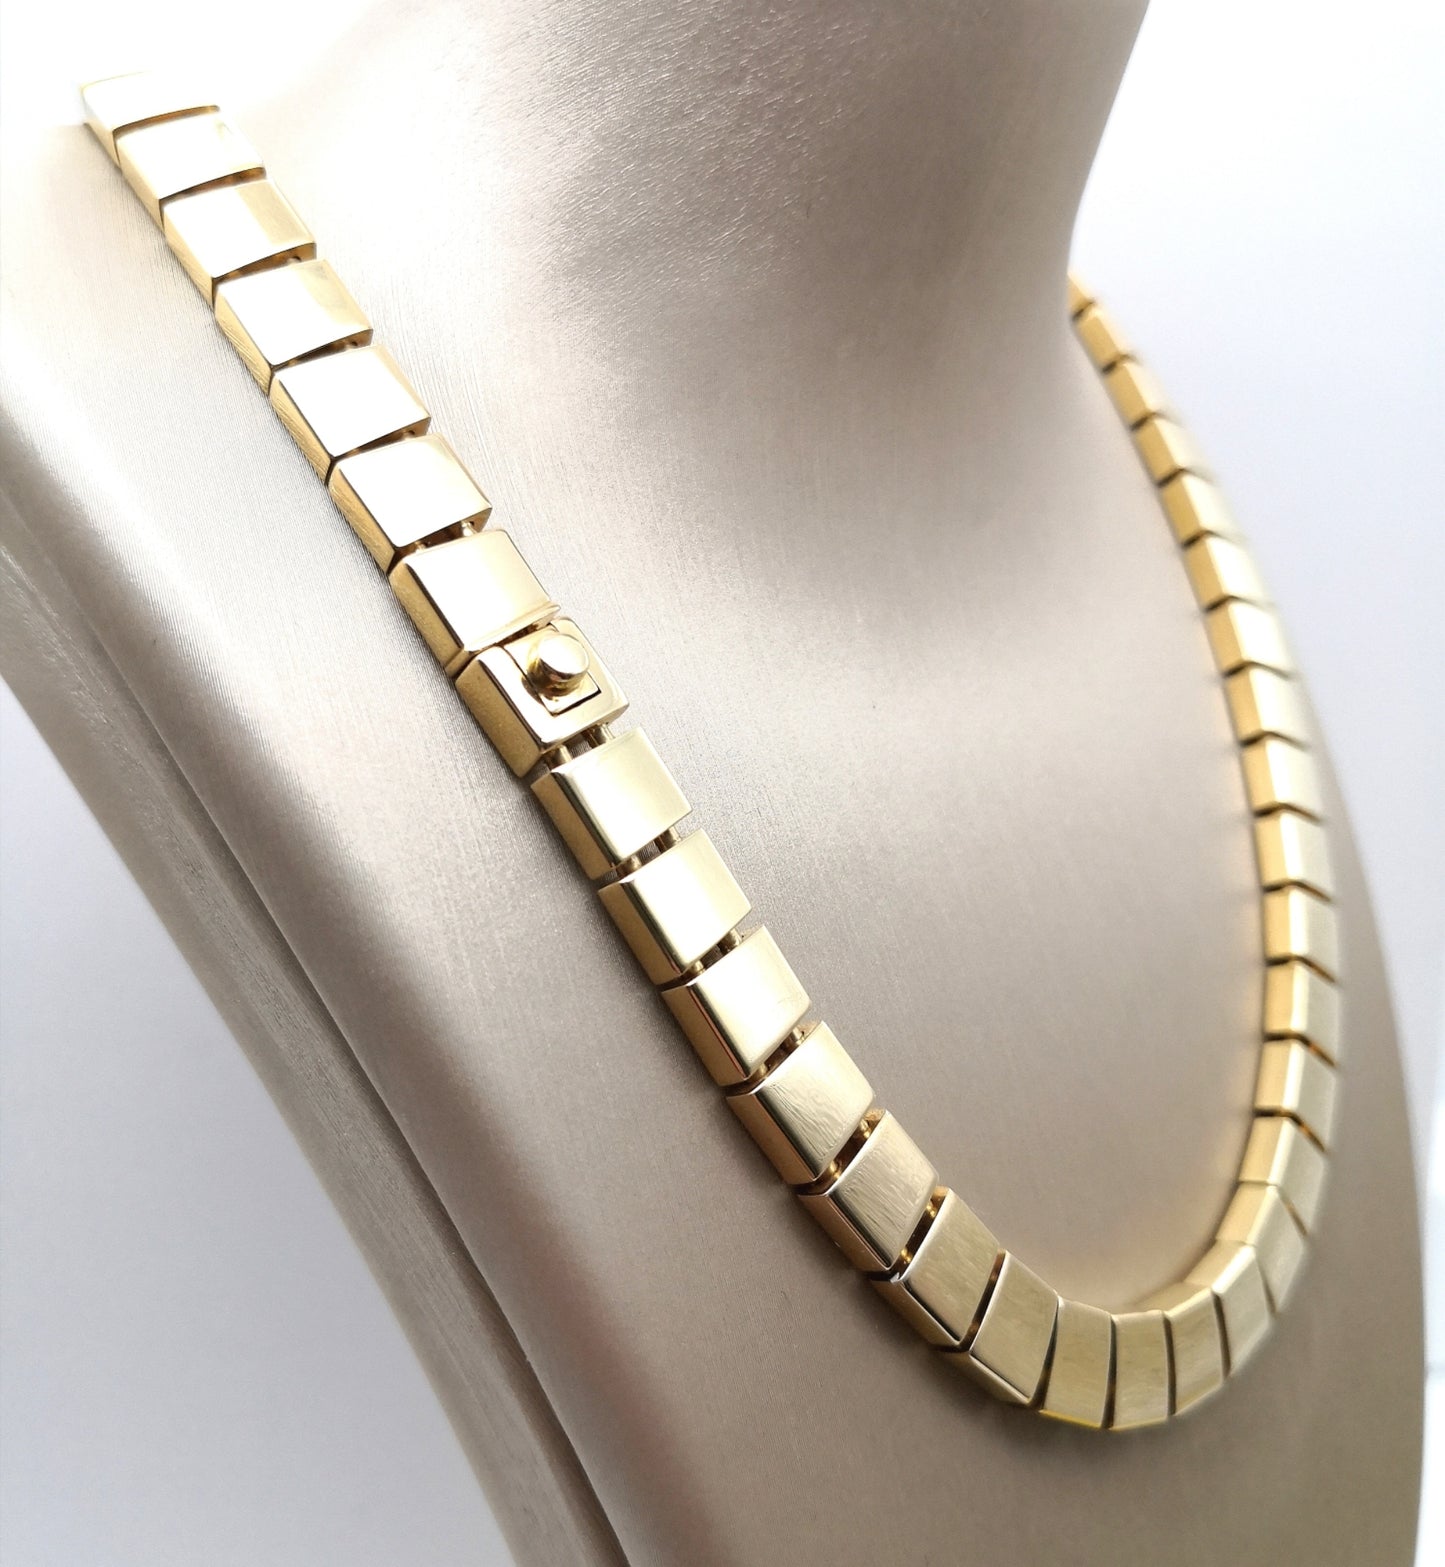 Pavan Jewelry - Yellow gold necklace